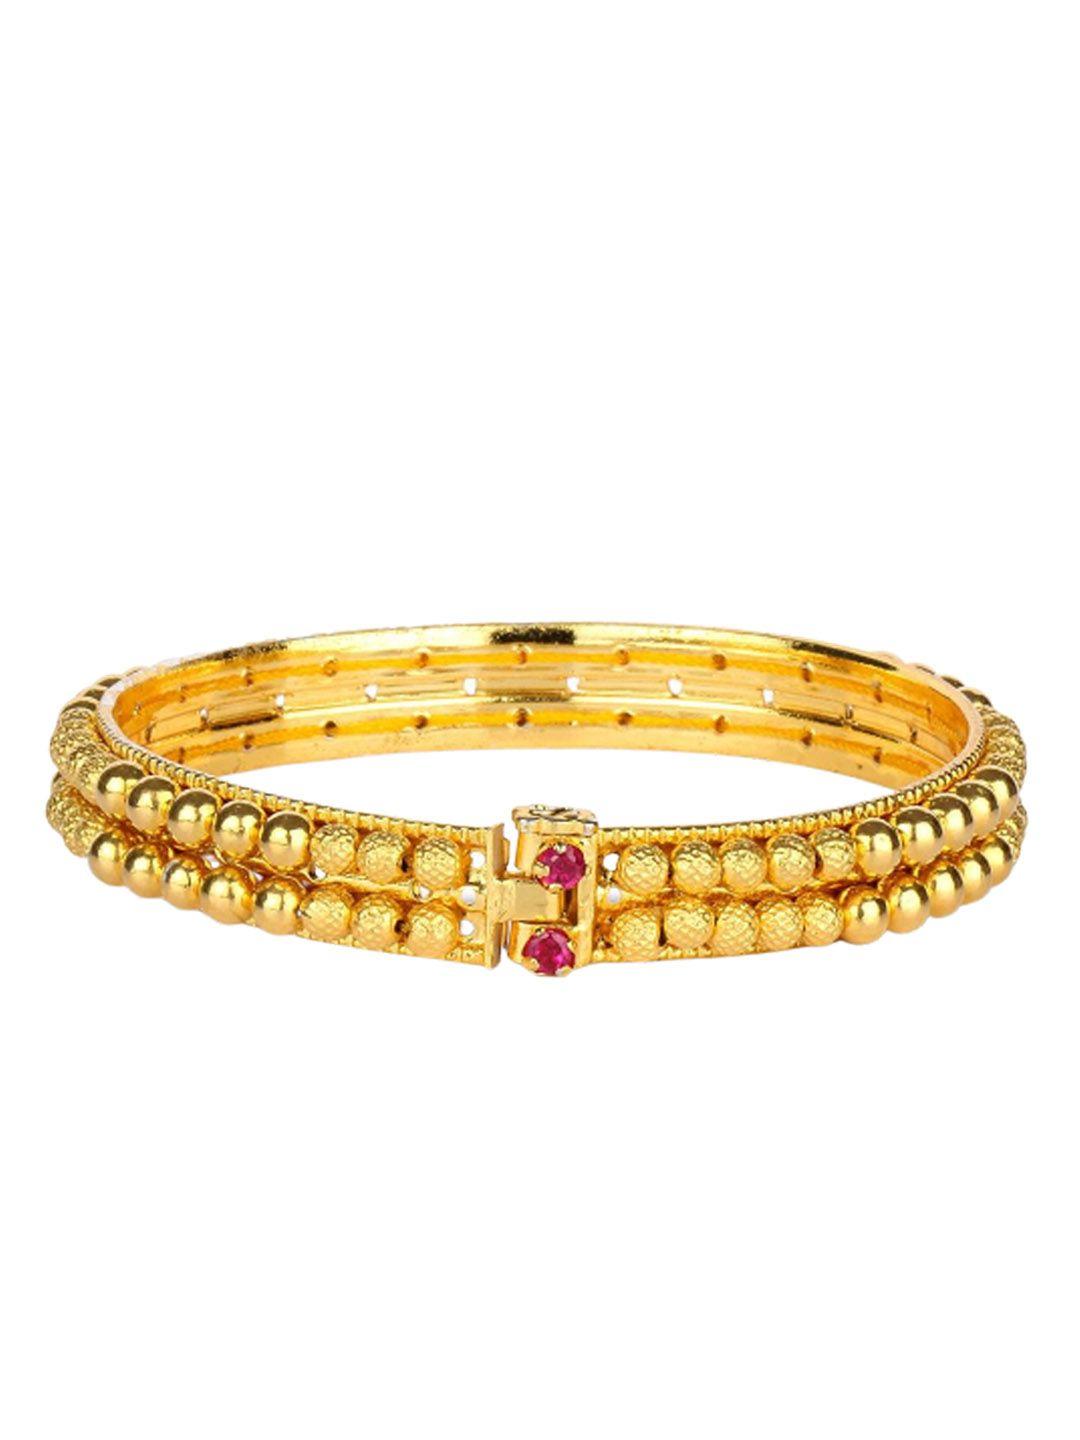 candere a kalyan jewellers company 22kt (916) gold traditional tushi bangle- 2.29gm